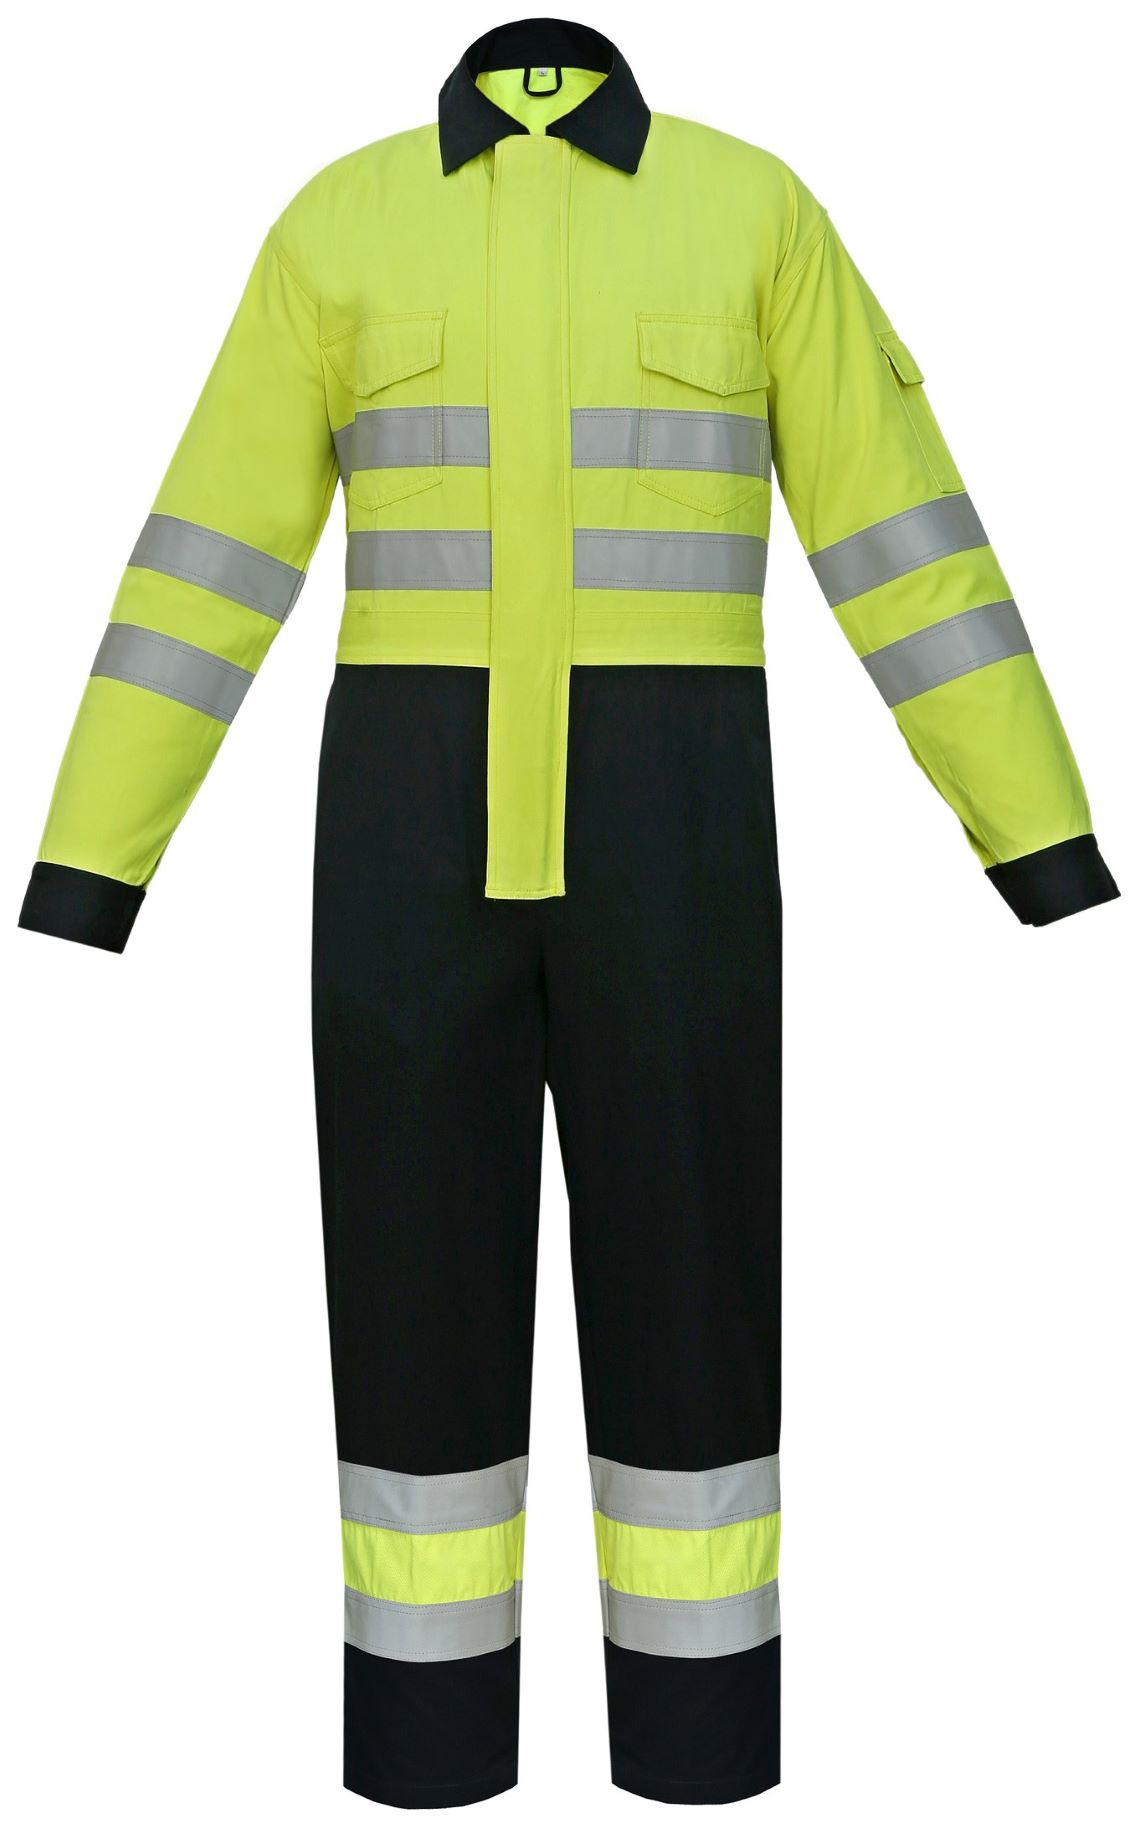 INHERENT FR DUAL TONE PRO ELITE COVERALL